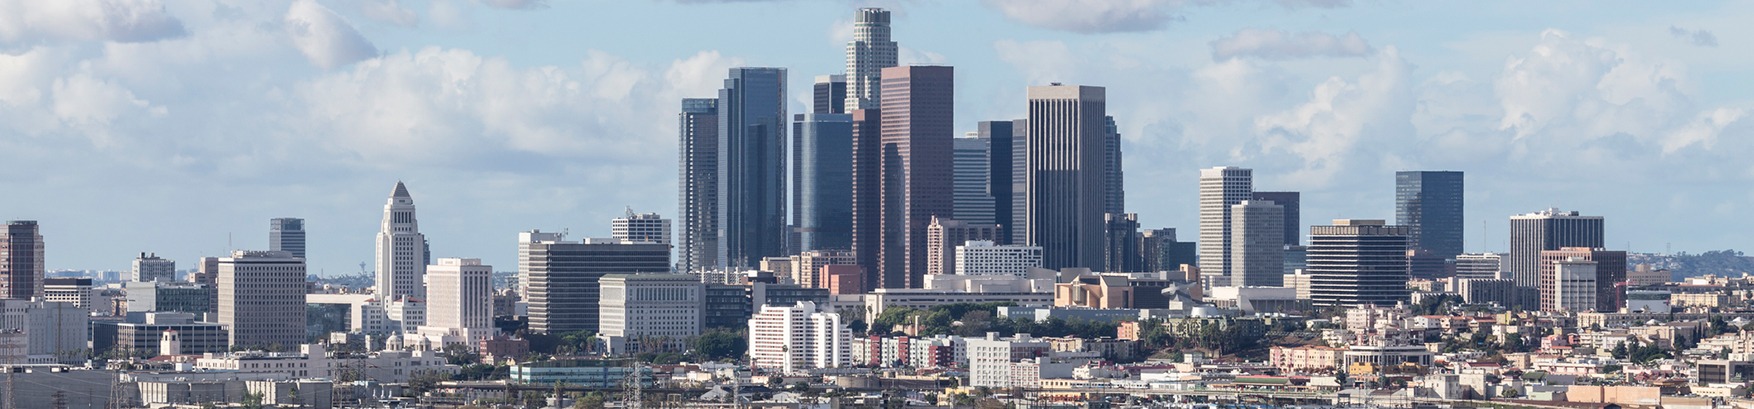 Los Angeles skyline during the day, one of the many areas served by Super Woman Super Lawyer